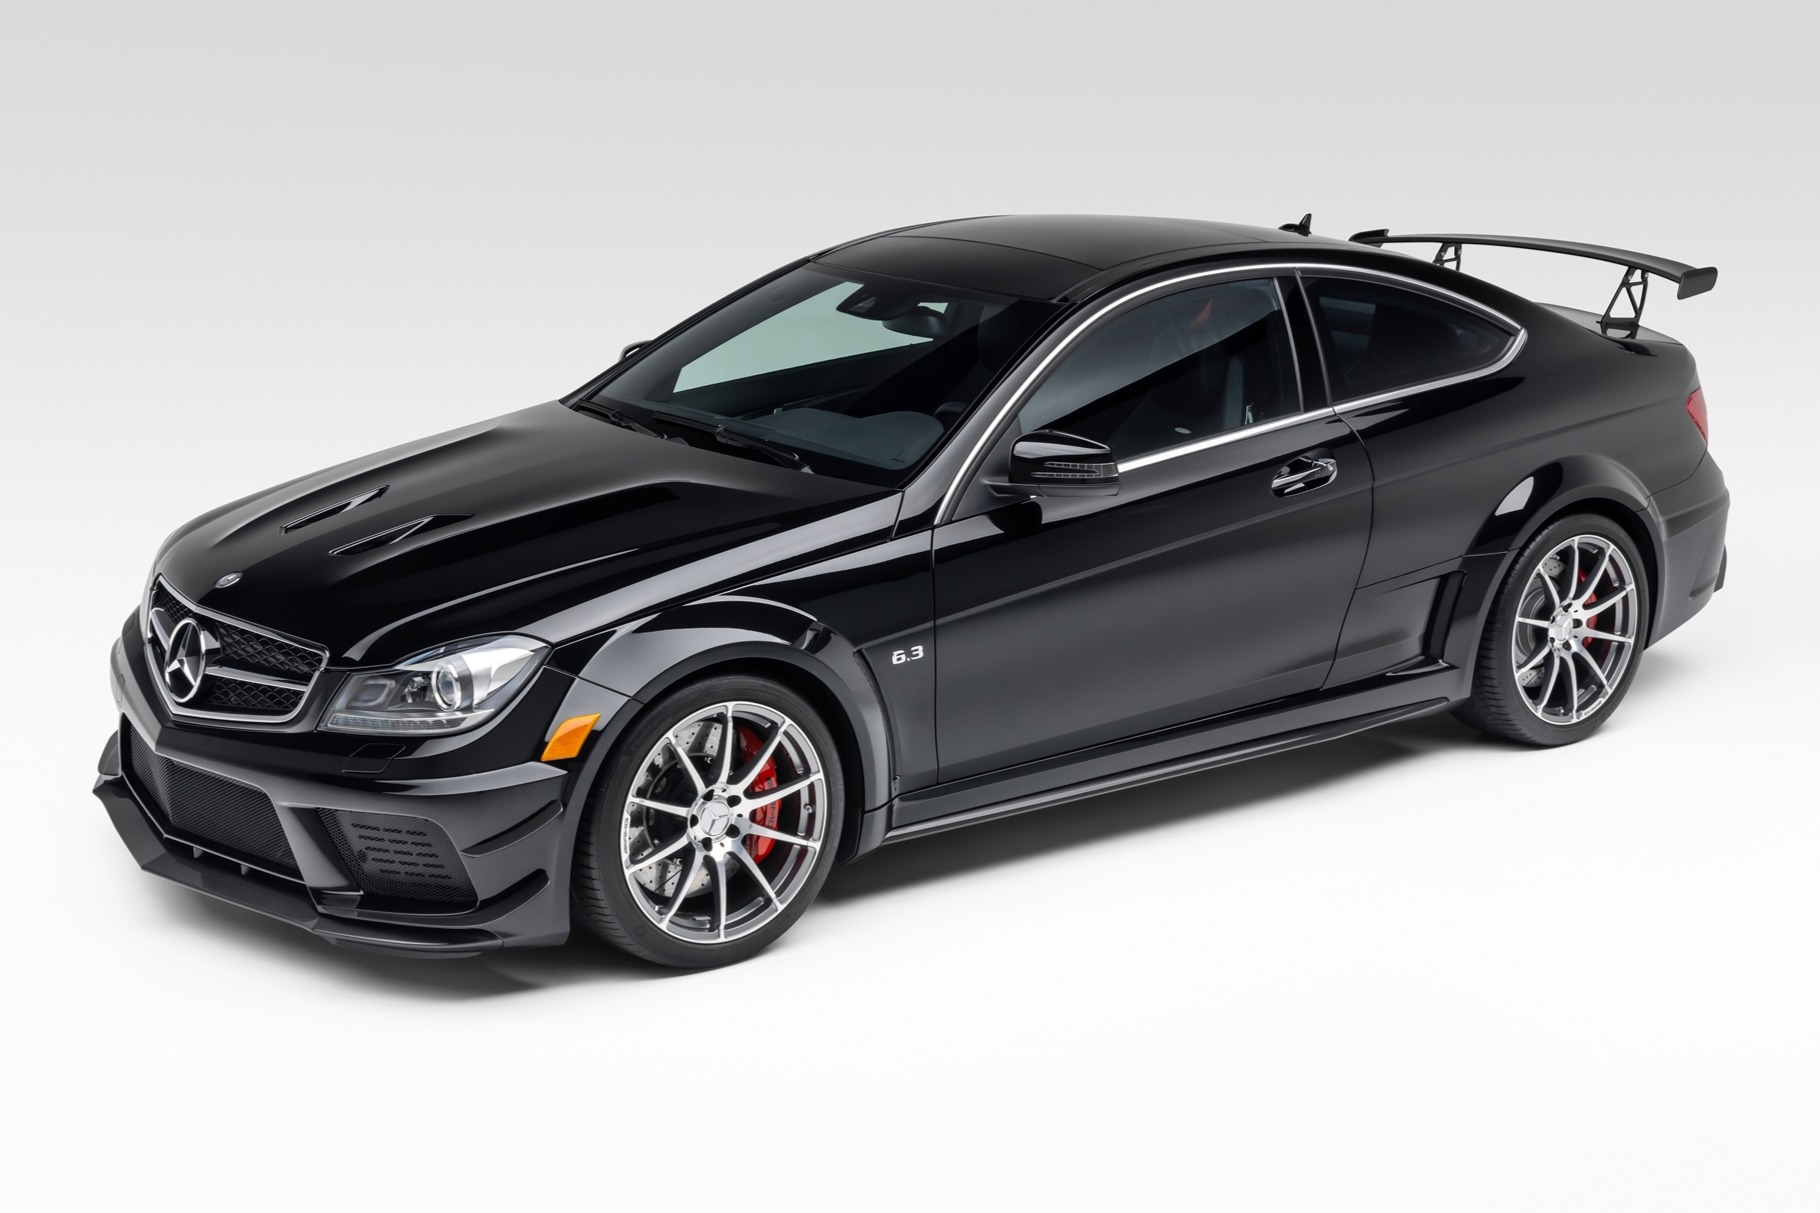 Used 2,800-Mile 2012 Mercedes-Benz C63 AMG Black Series Review